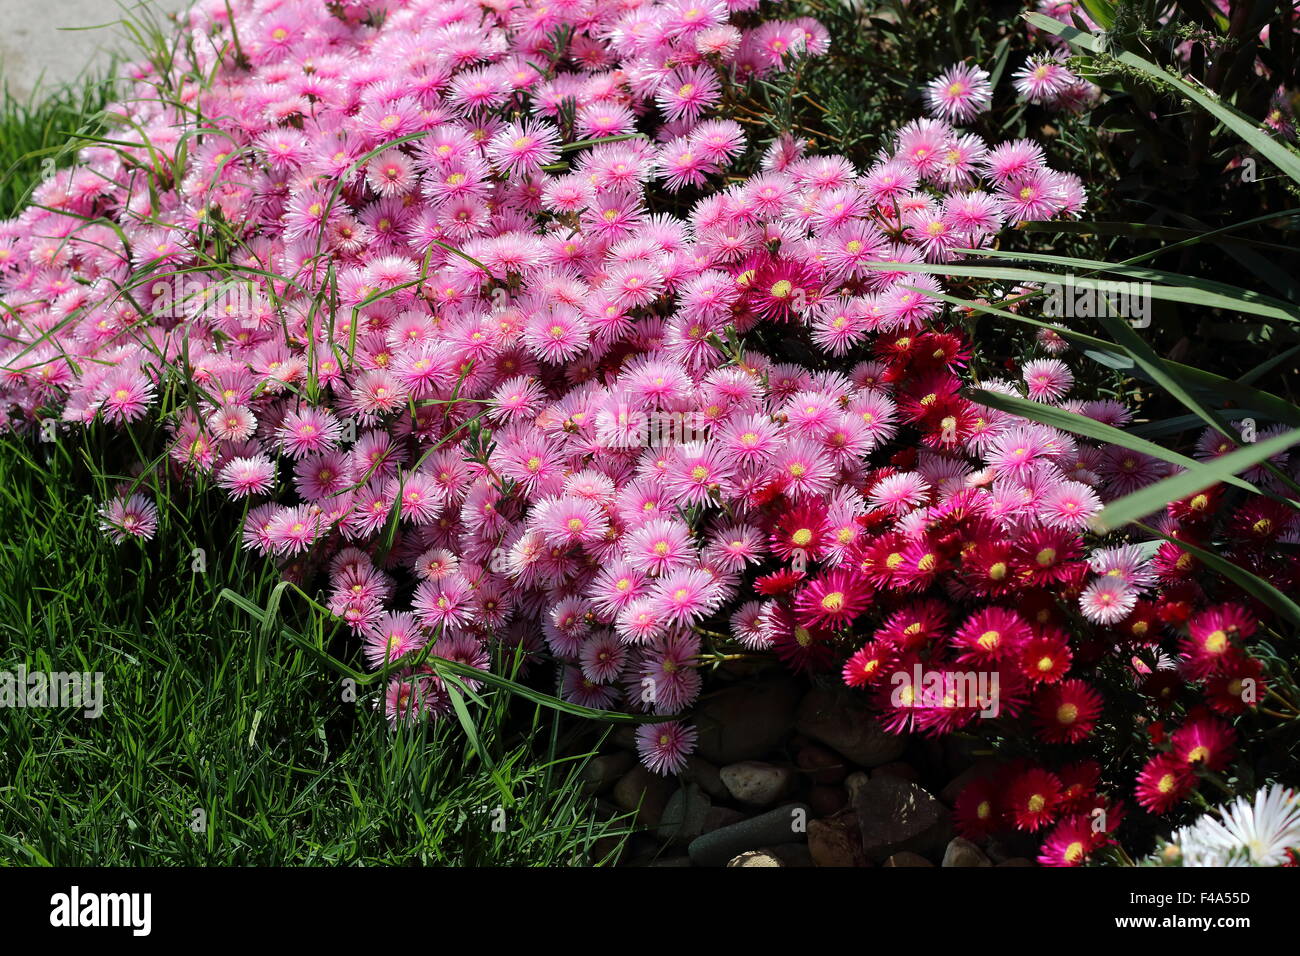 Red  and Pink Pig Face or known as Mesembryanthemum or Livingstone Daisies in full bloom Stock Photo